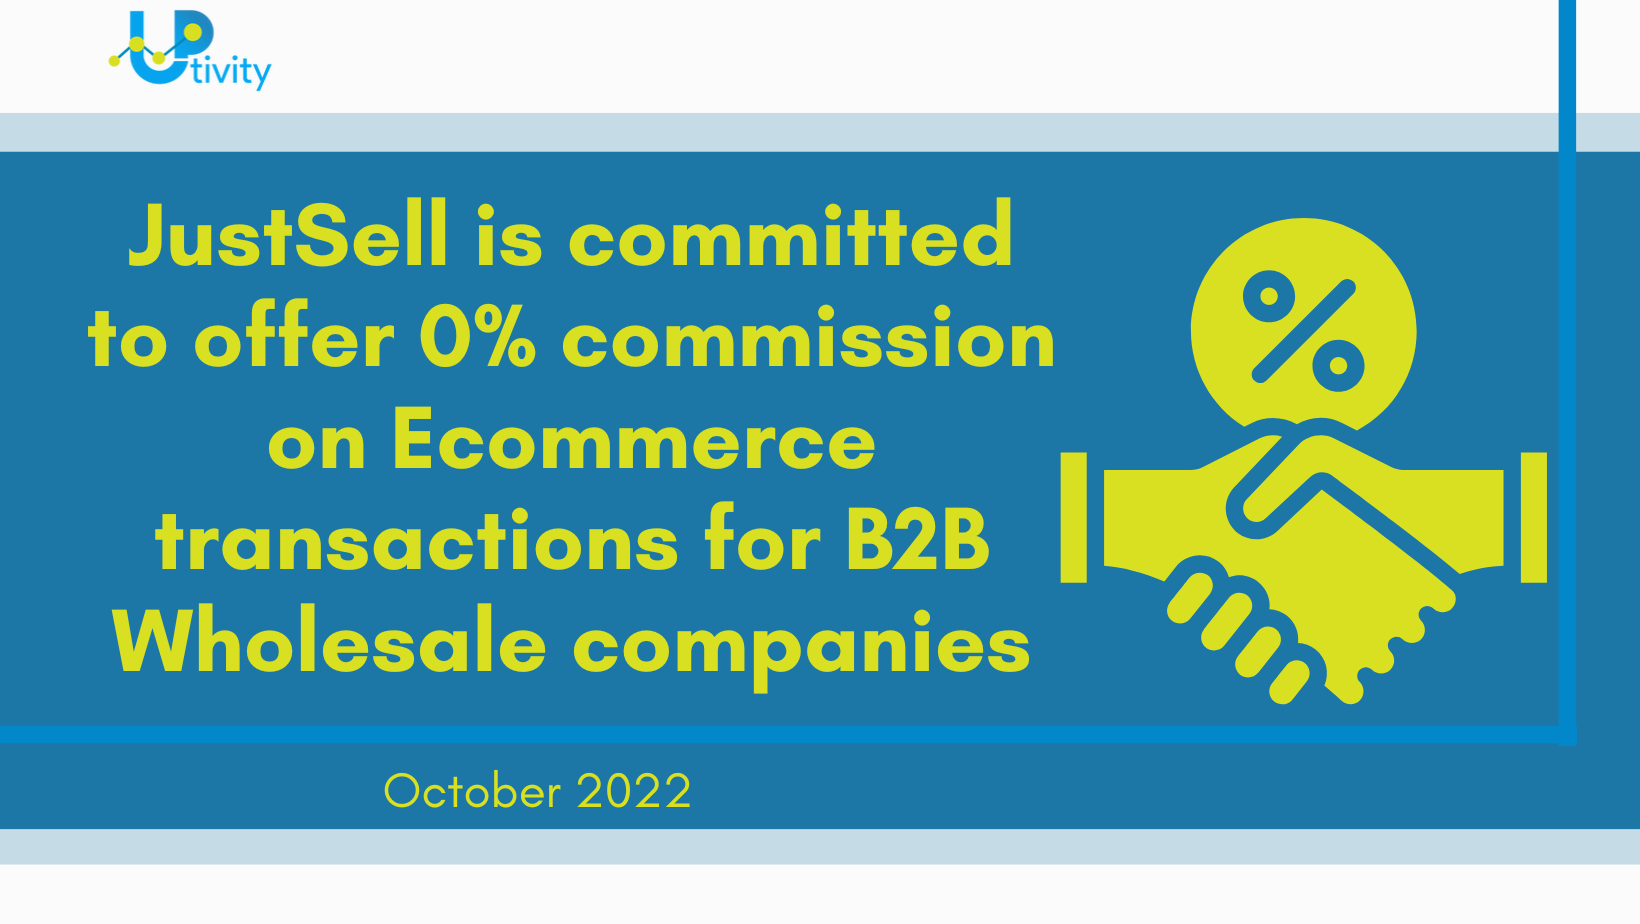 JustSell is committed to offer 0% commission on Ecommerce transactions for B2B Wholesale companies